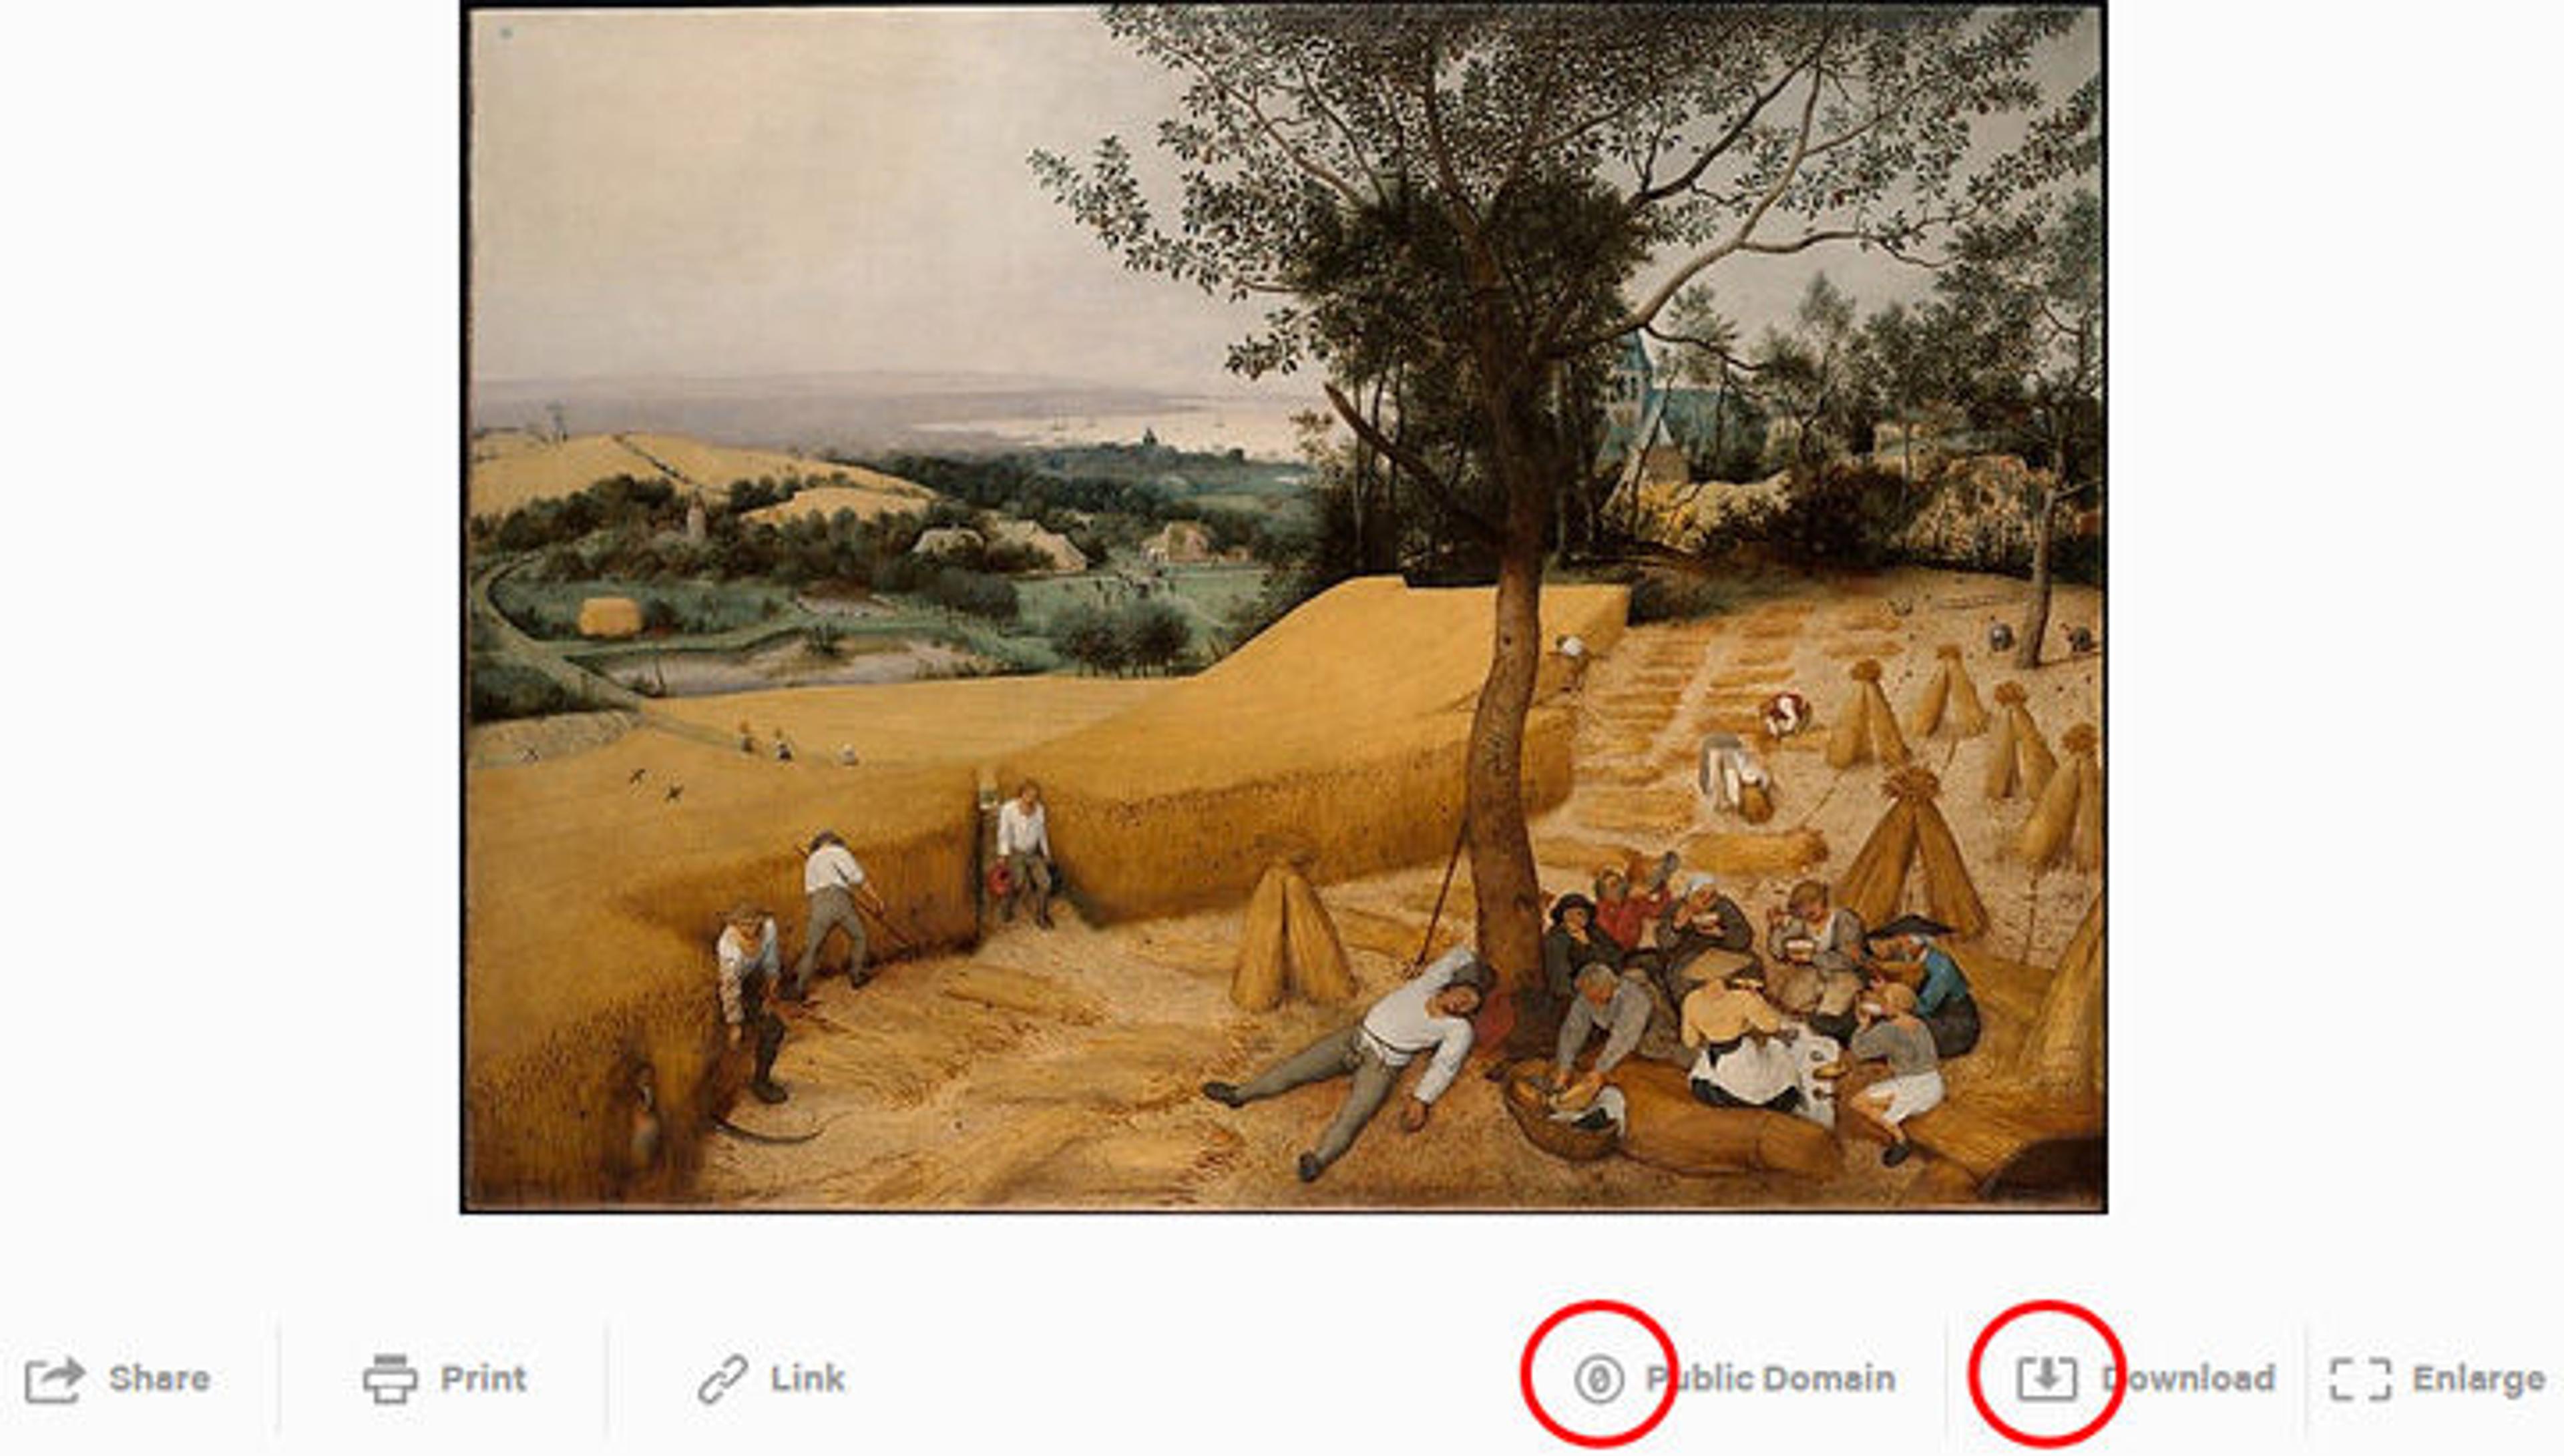 The CC0 and Download icons circled below an image of Bruegel's "The Harvesters" in the Collection section of this website